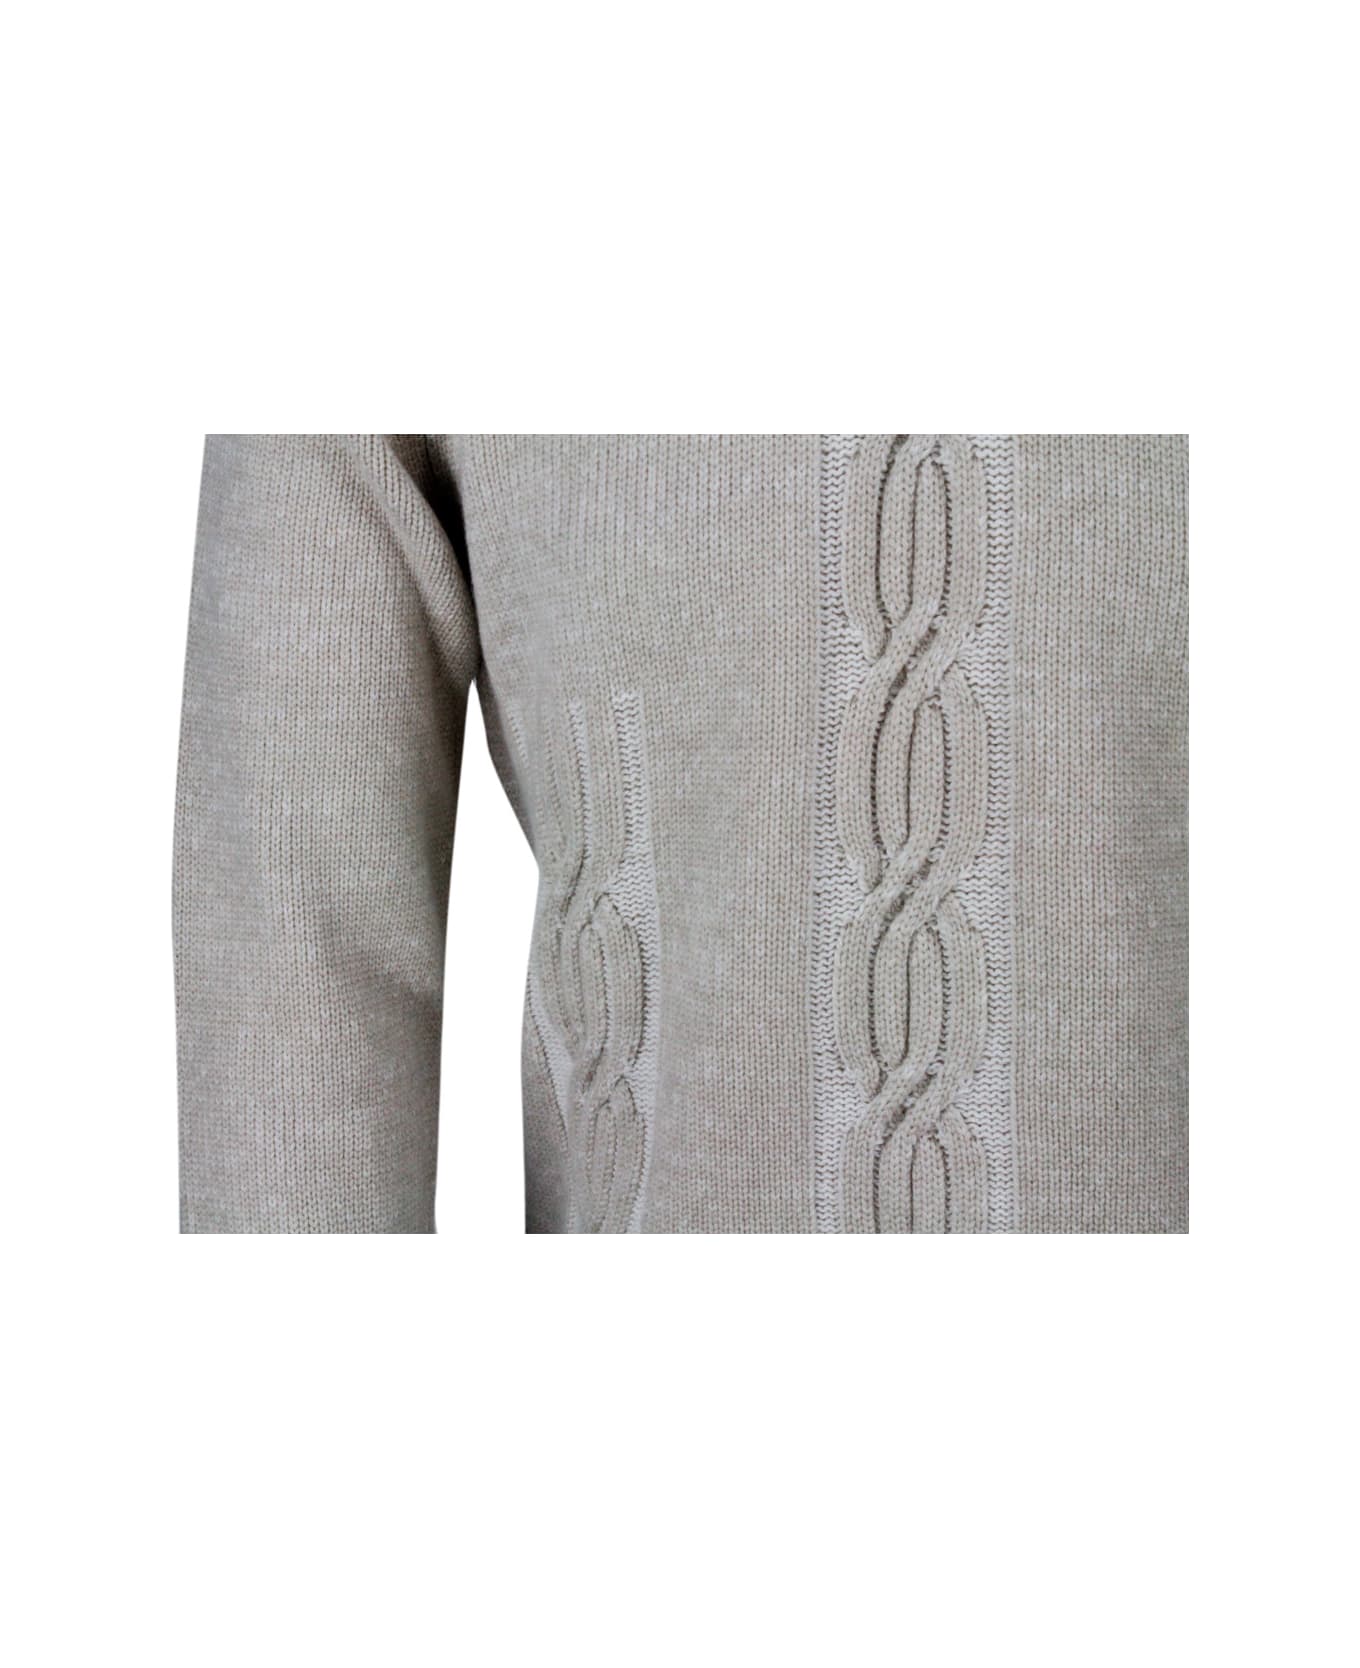 Kiton Long-sleeved Crew-neck Sweater In 100% Pure Cashmere With Braid And Vanisè Coloring - Ivory